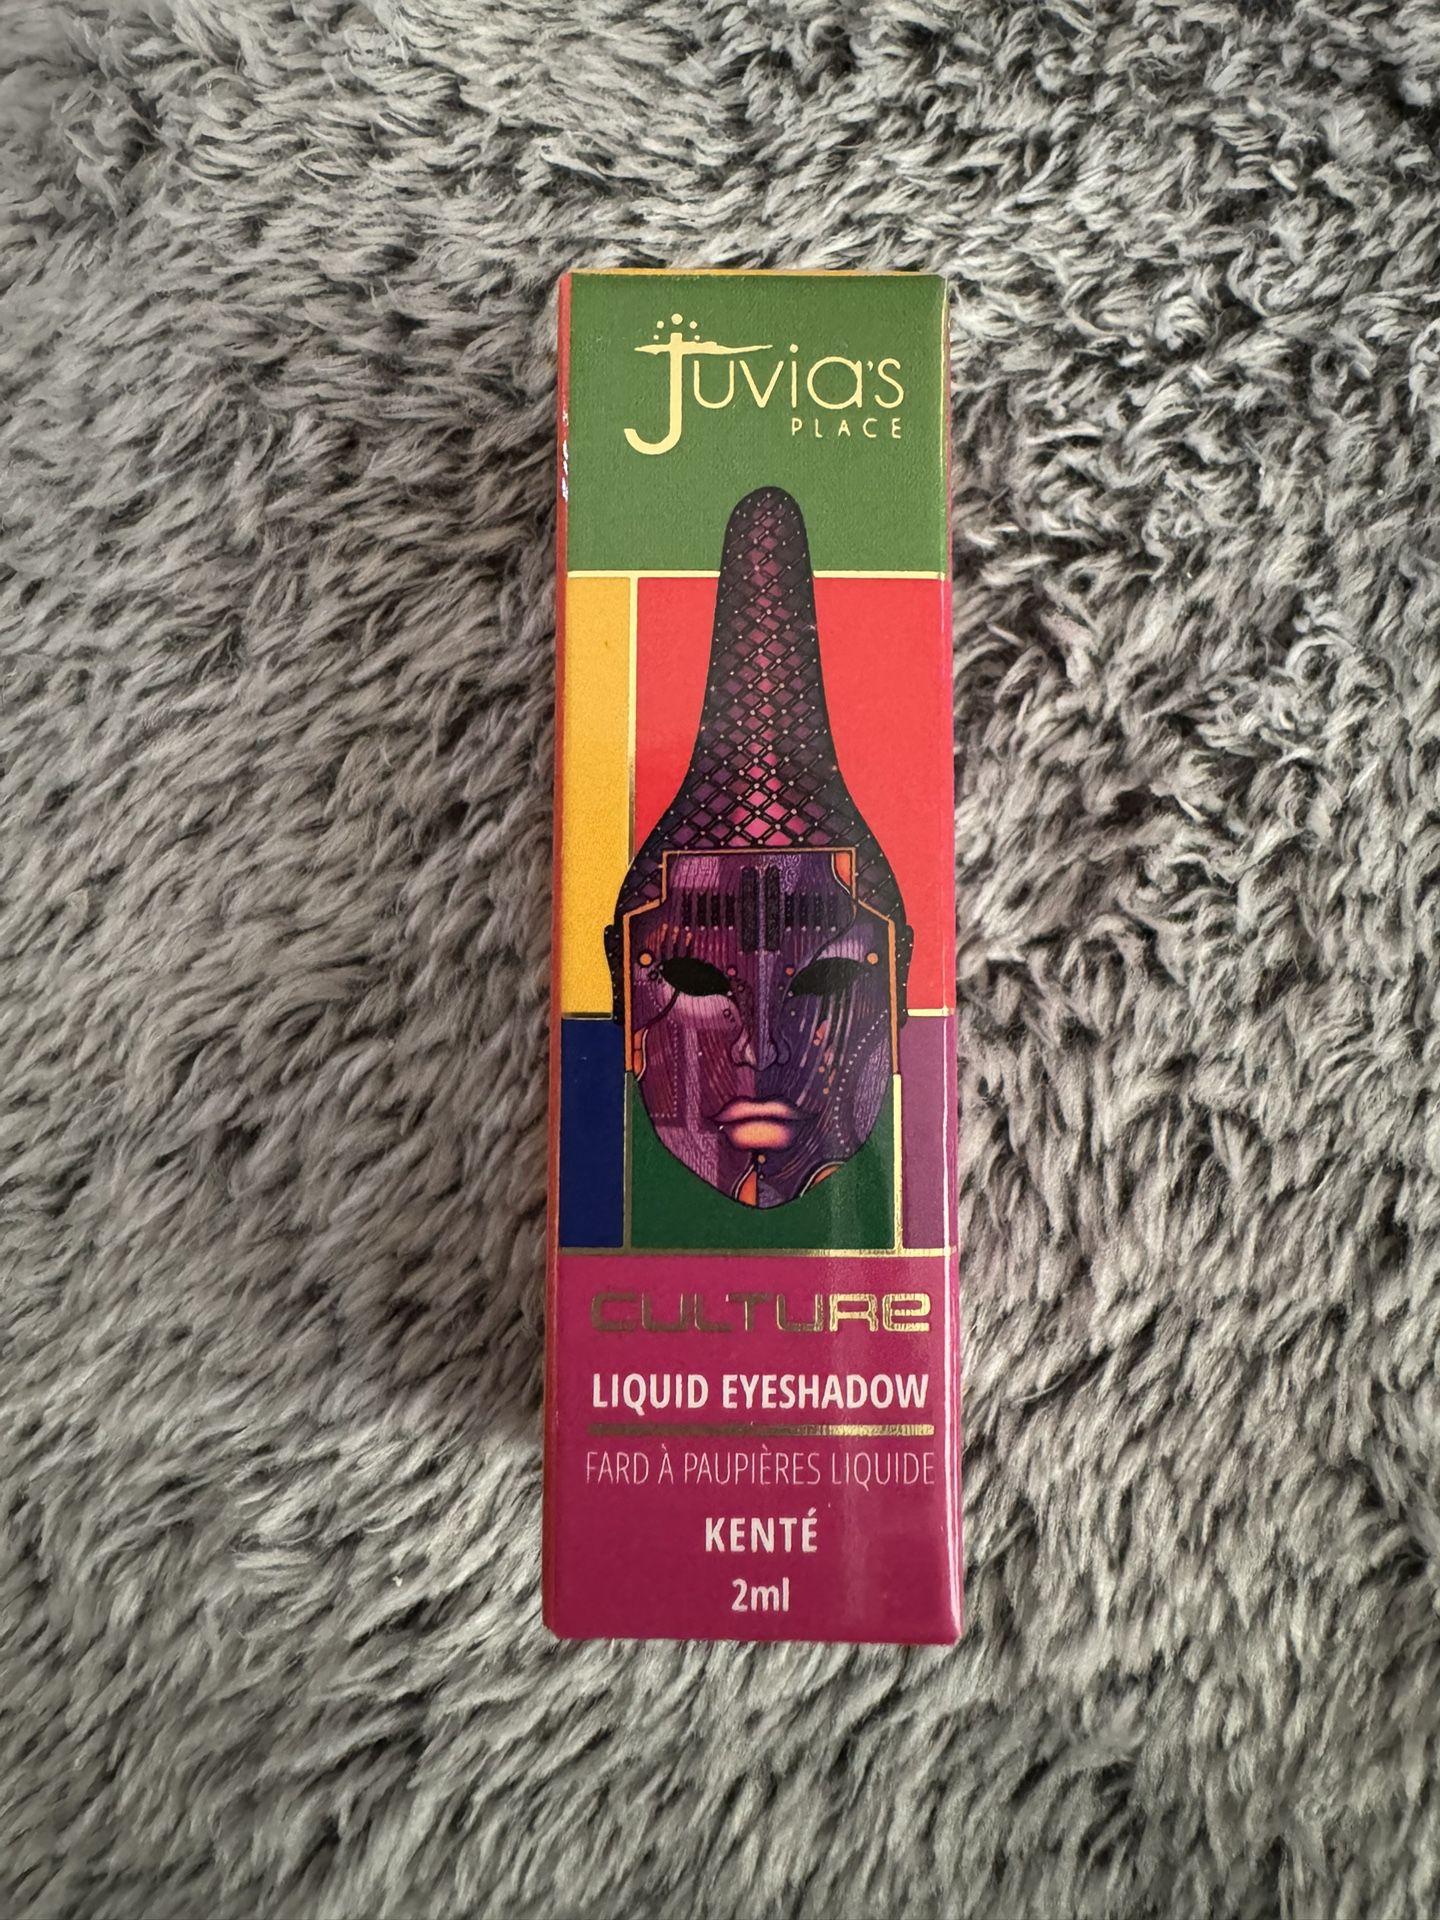 NEW JUVIAS PLACE FULL SIZE CULTURE LIQUID EYESHADOW IN KENTE $5!